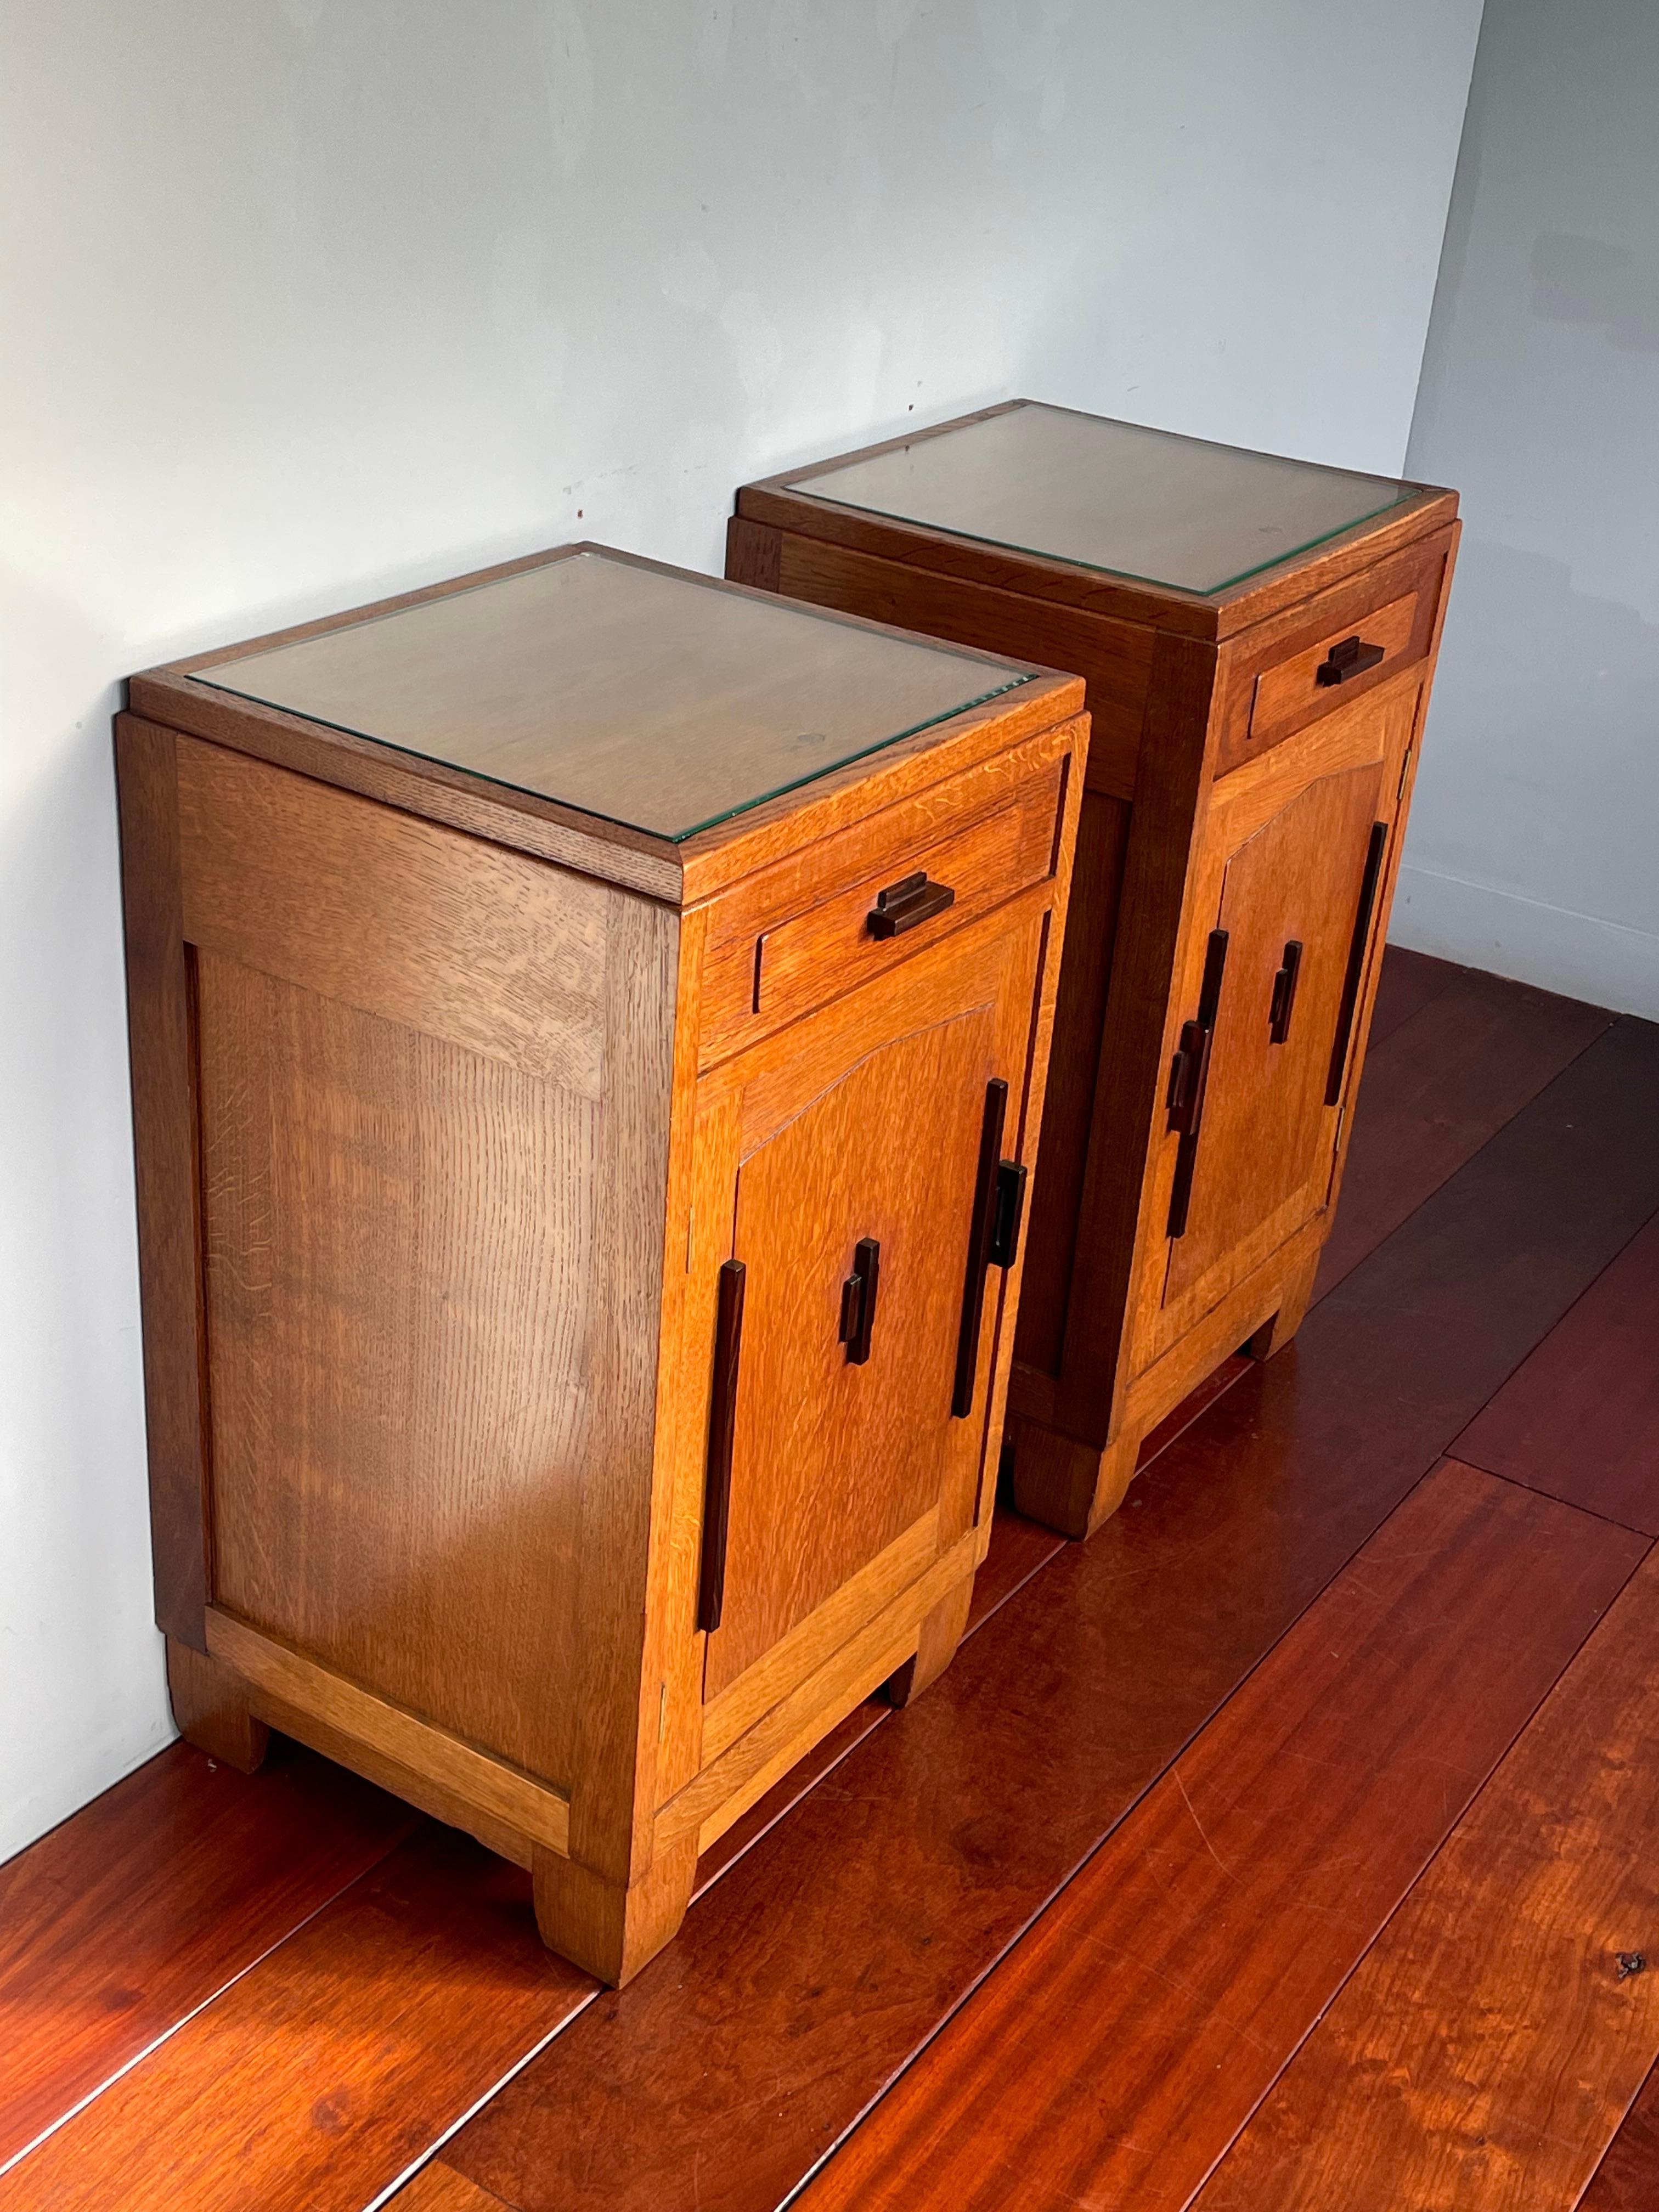 Best ever pair of Dutch Arts & Crafts nightstands with original glass tops.

If you are looking for truly timeless and beautifully handcrafted bedside cabinets then this Arts & Crafts pair could be yours to own and enjoy soon. They are made of a